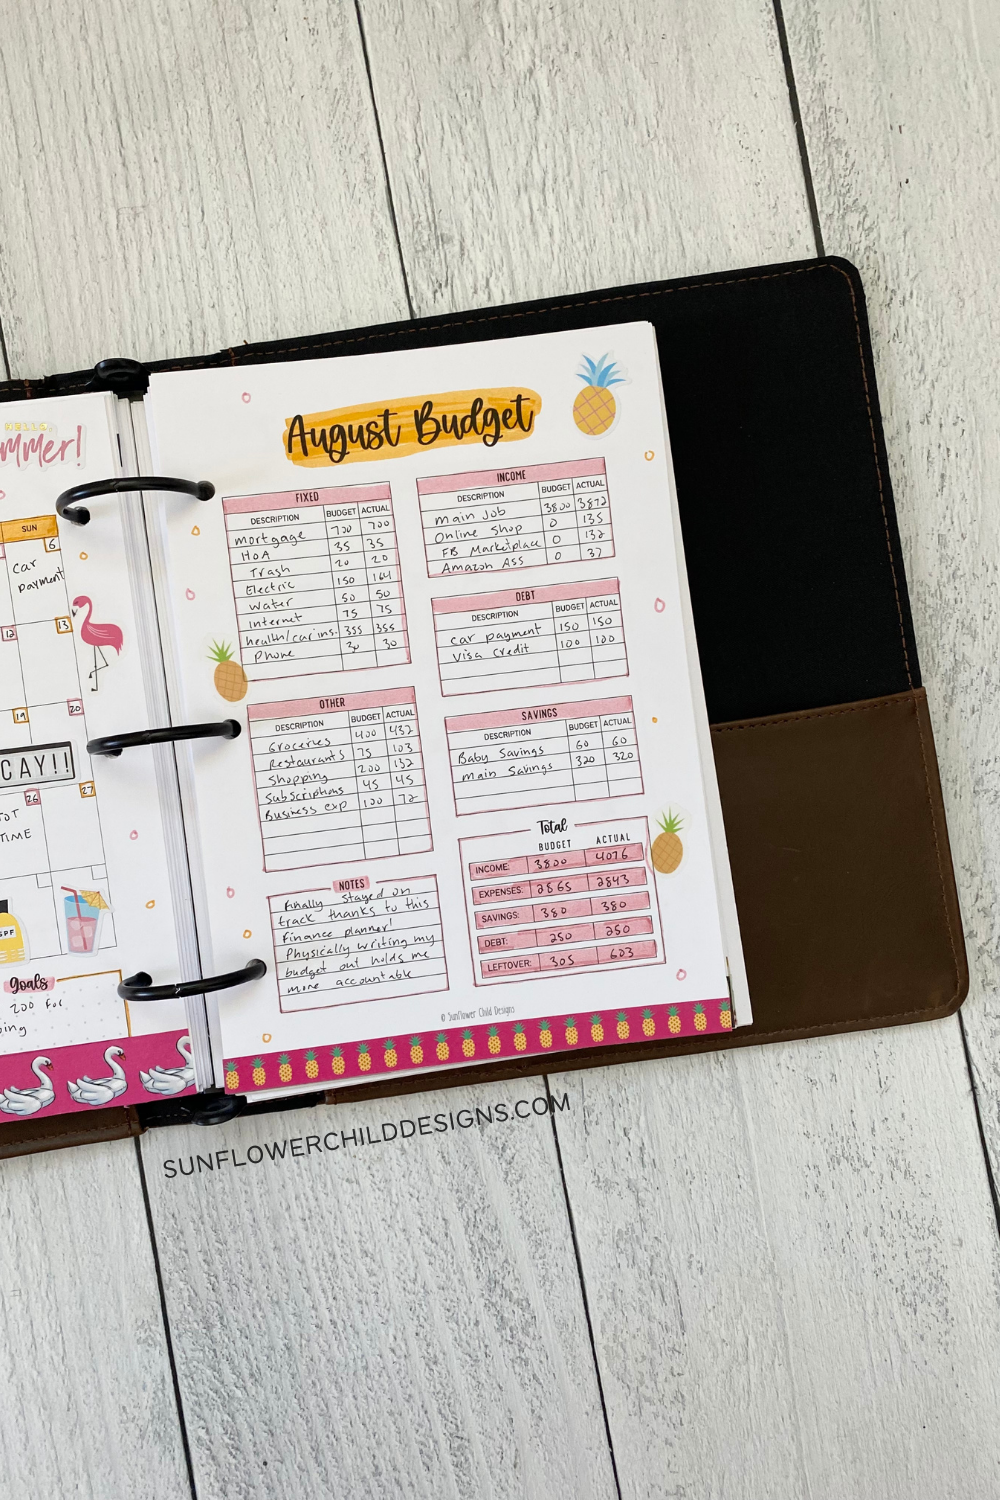 August Monthly Budget from the Finance Planner